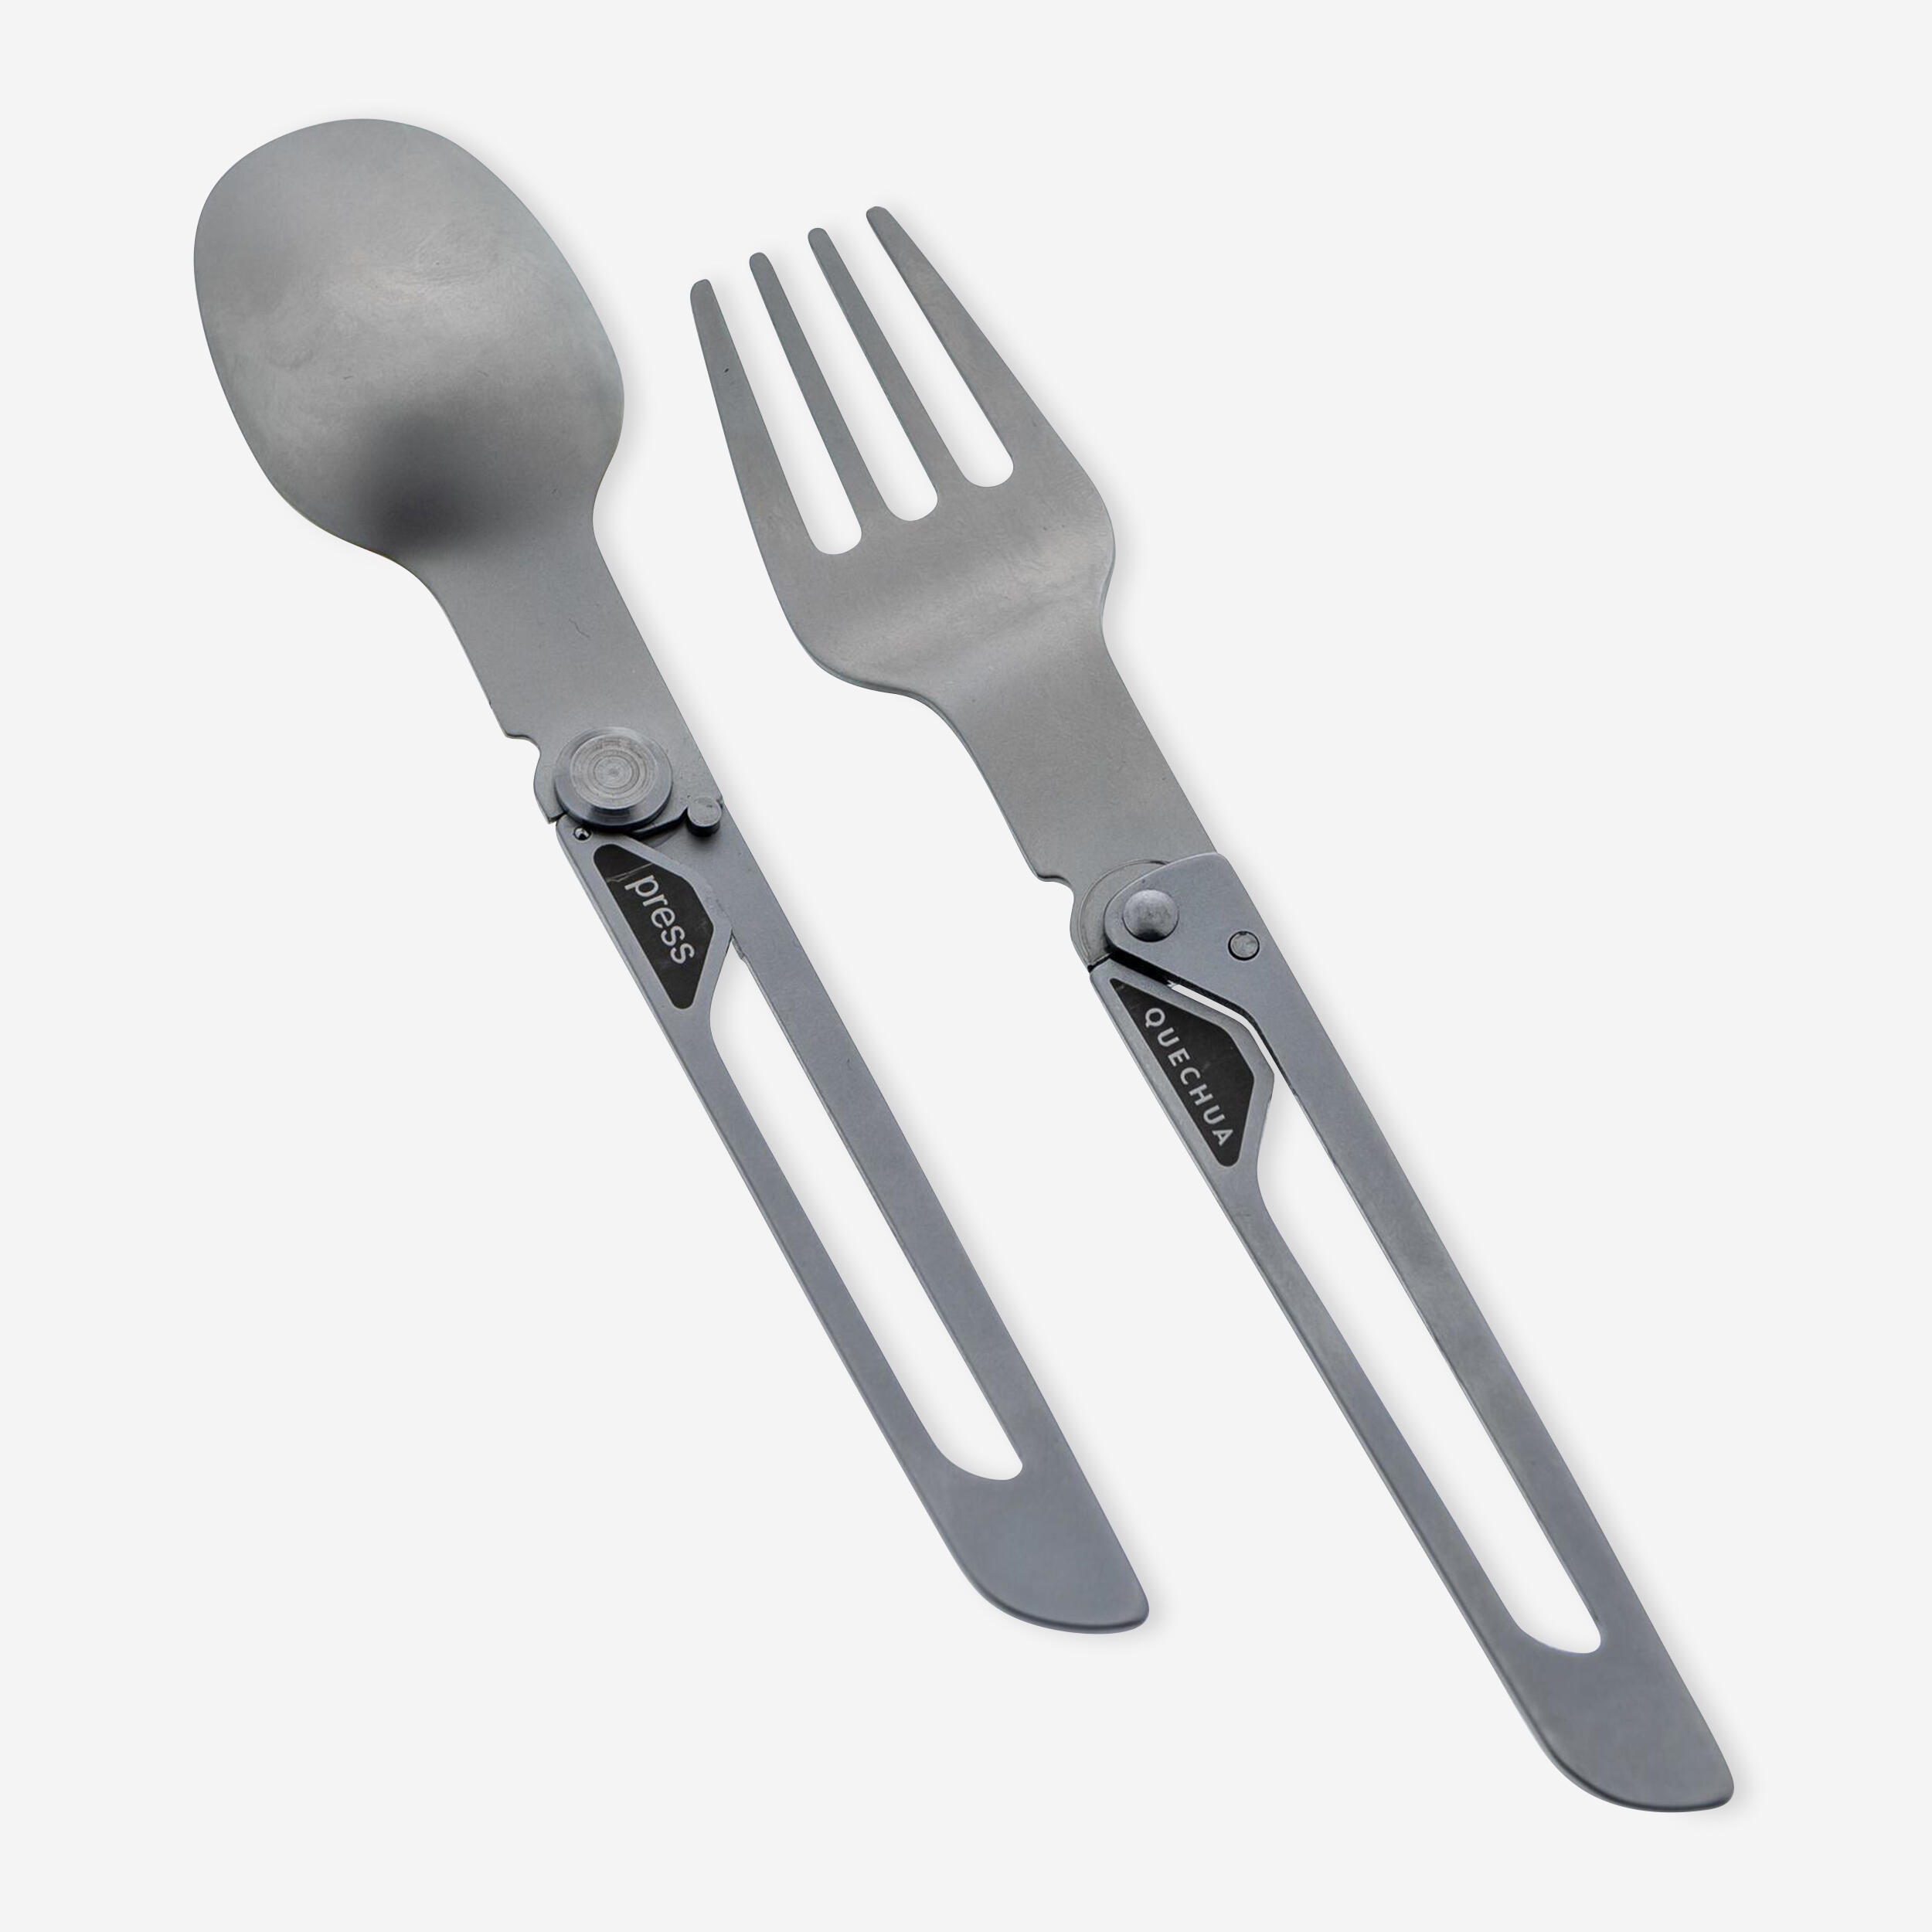 MH500 Folding Stainless Steel Hiking and Camping Cutlery (Fork, Spoon)